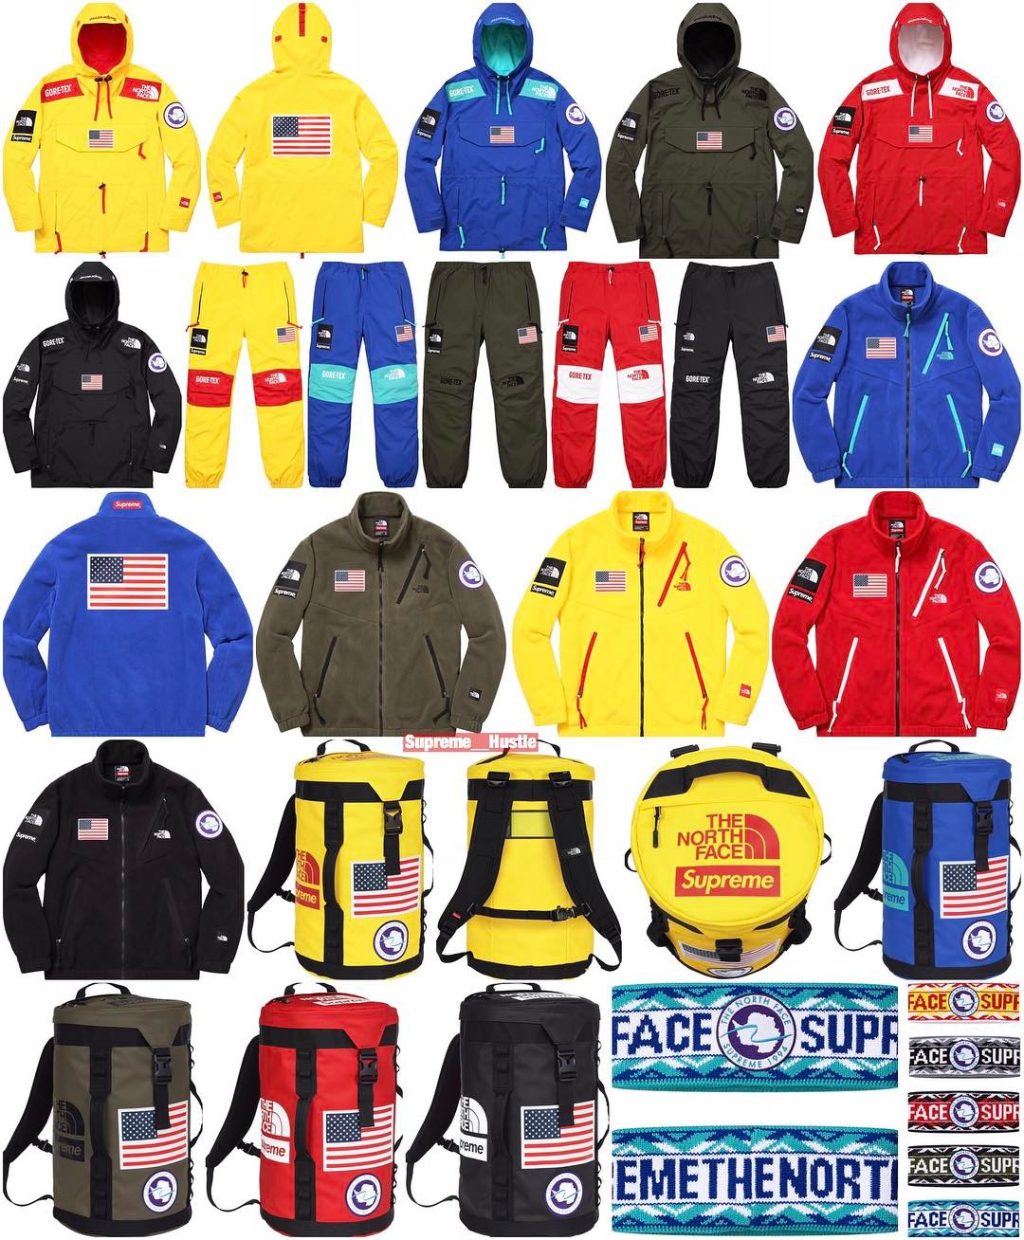 supreme-the-north-face-2017ss-collaboration-release-20170401